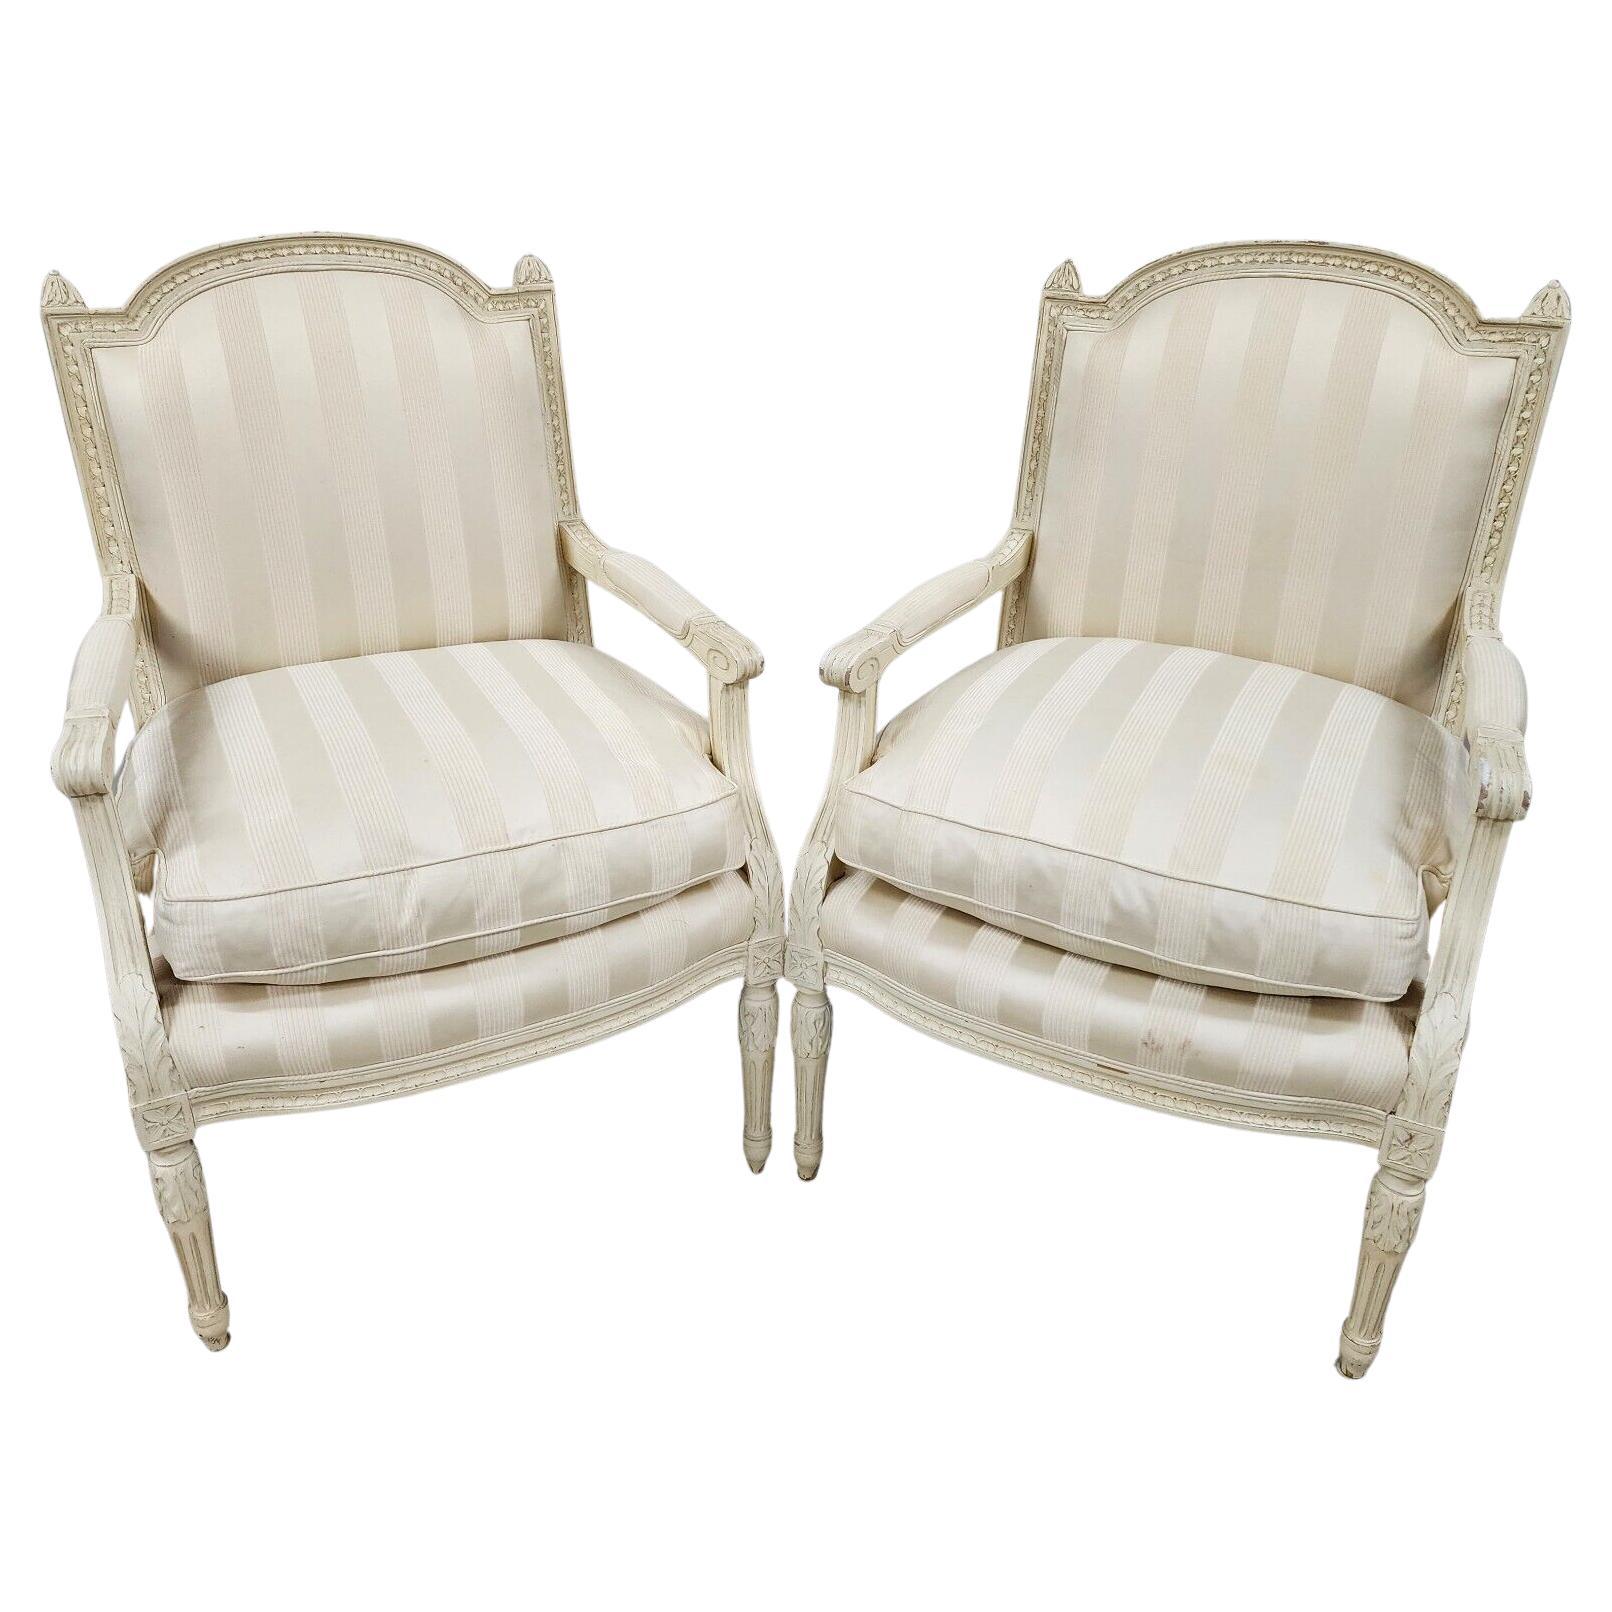 Vintage French Armchairs Shabby Chic